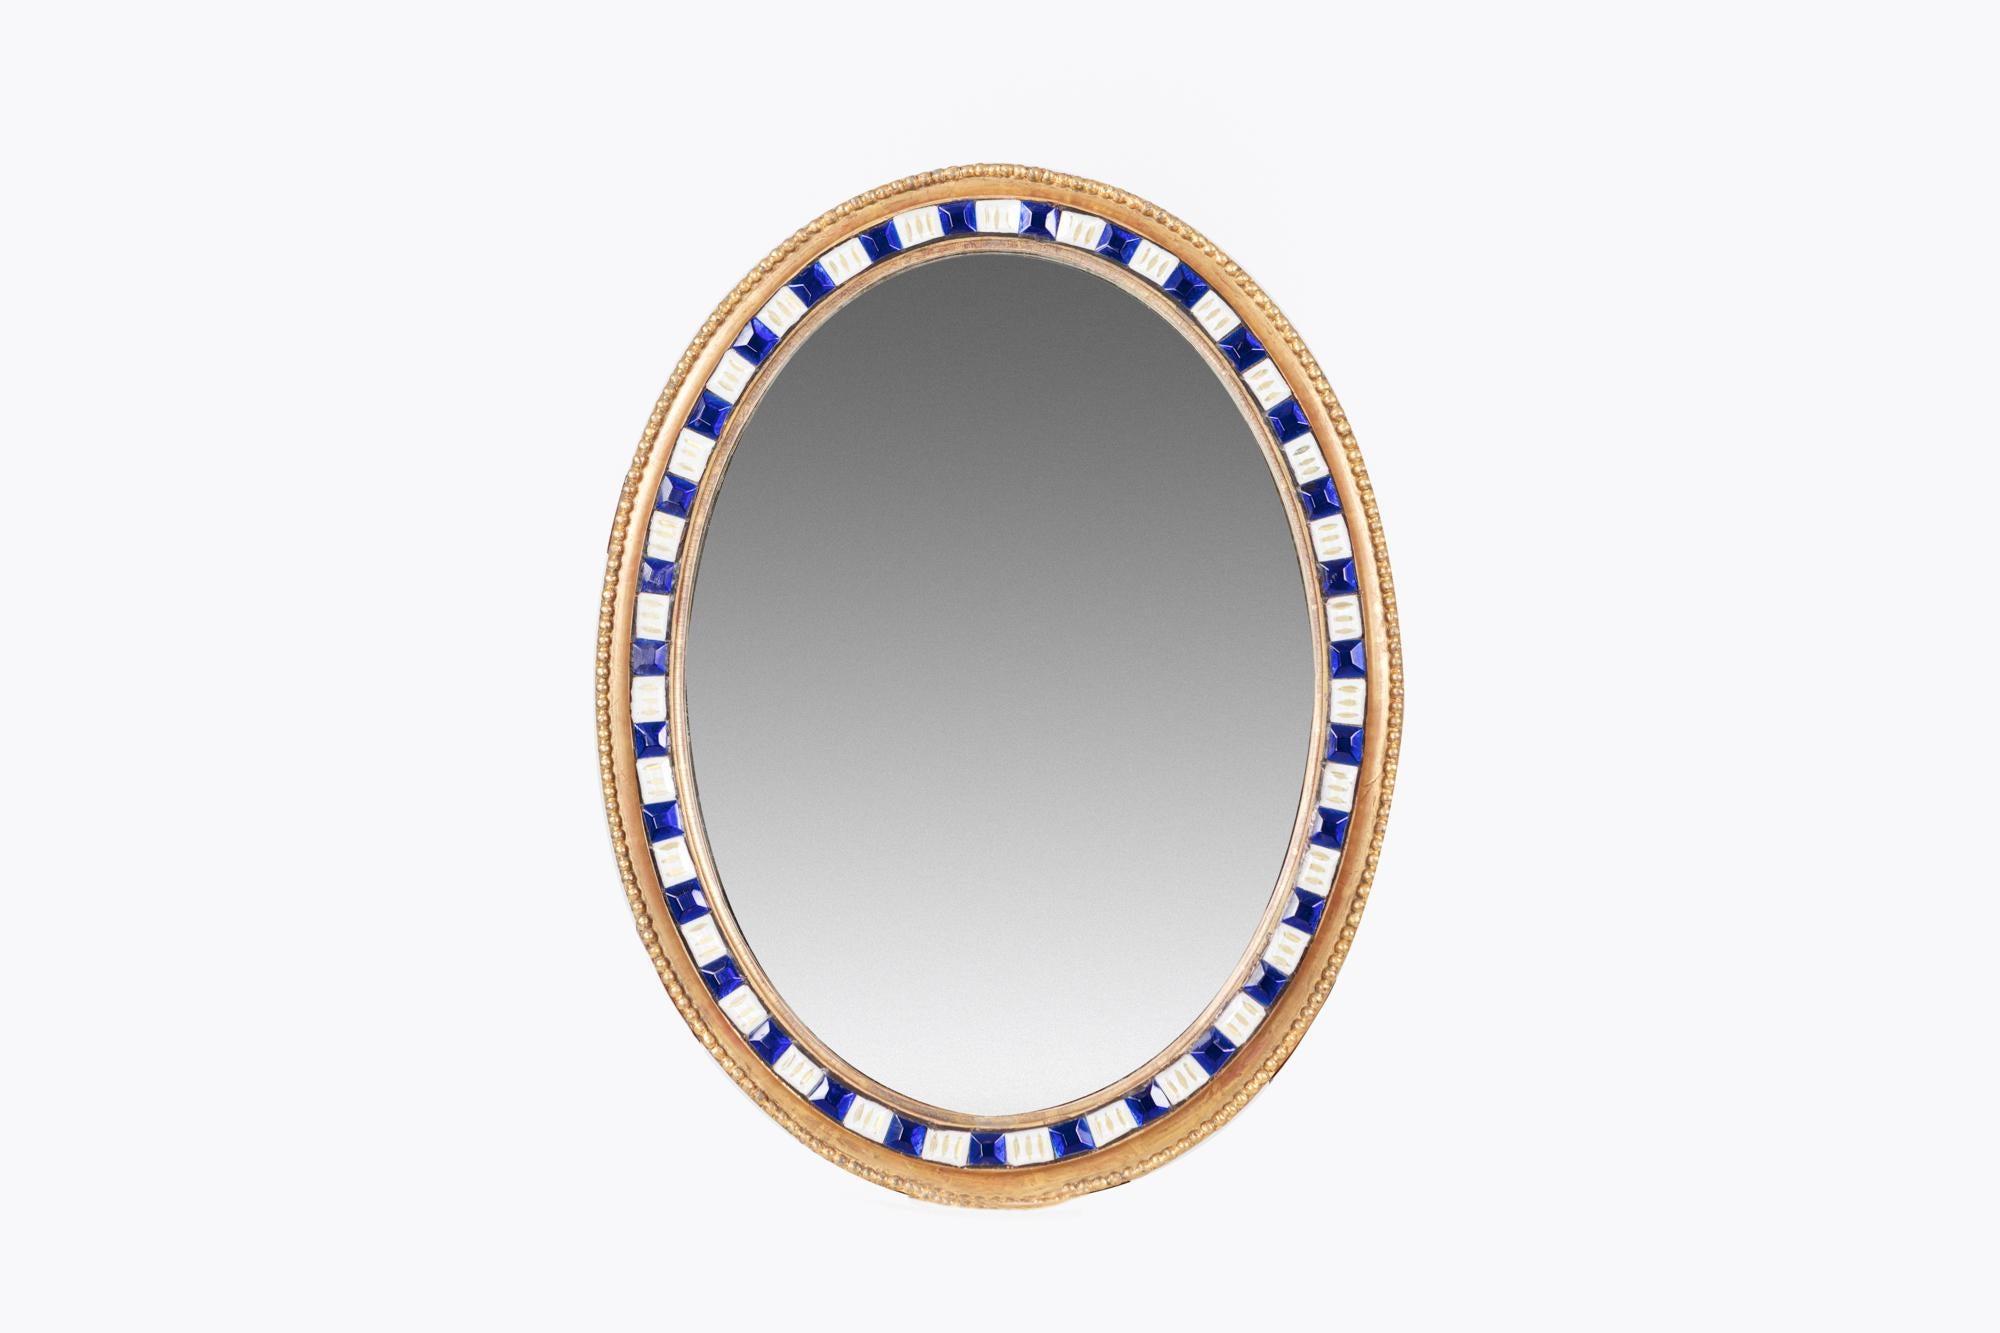 Early 19th century Irish George III Waterford large wall mirror of oval form, the giltwood frame with carved gadrooned edge and beading detail encompassing alternating faceted blue and white glass studs, circa 1800.